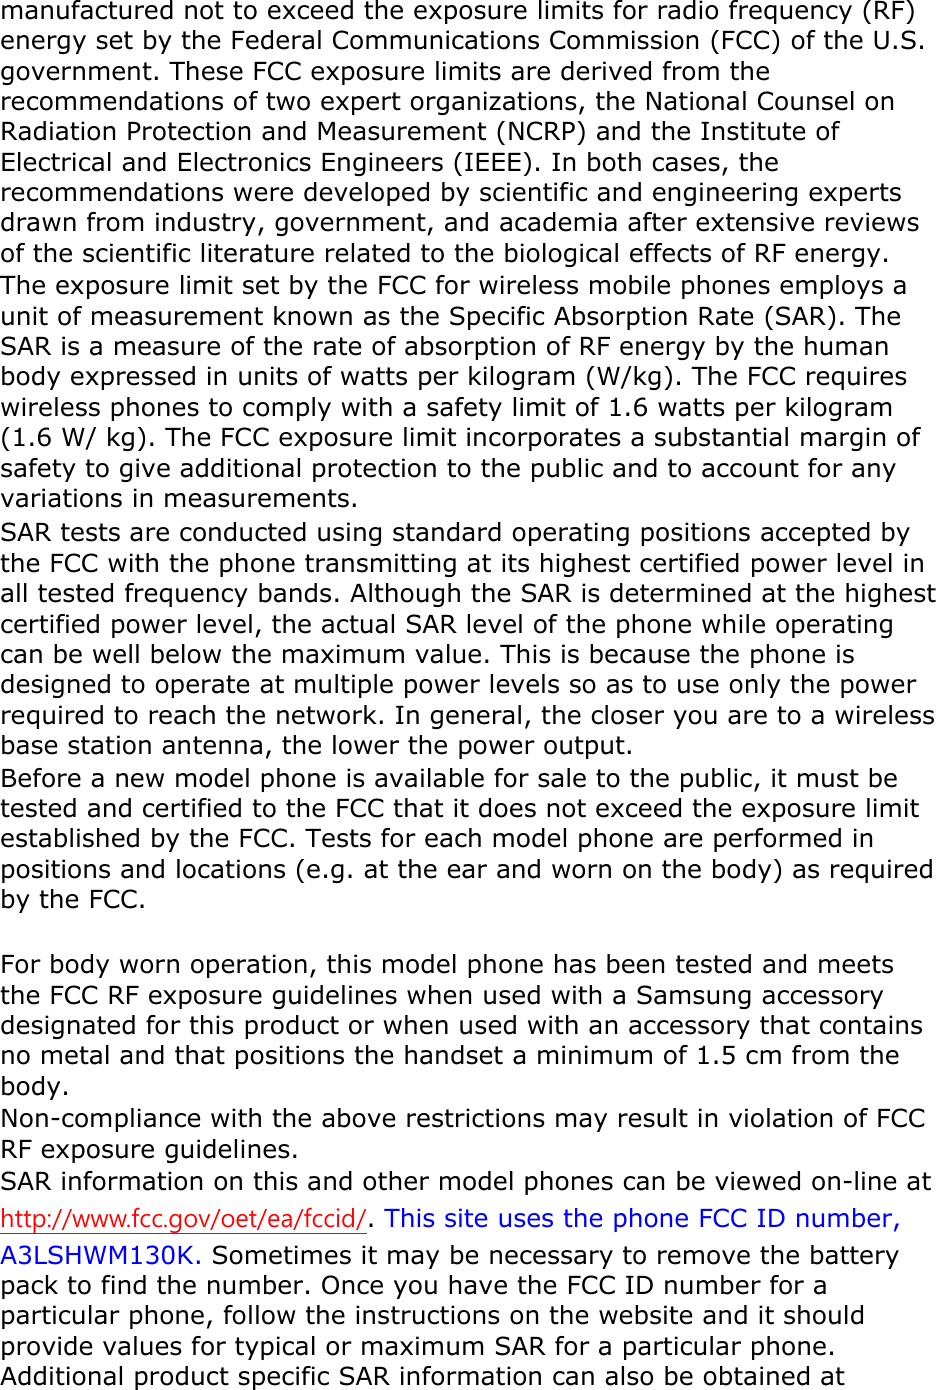 manufactured not to exceed the exposure limits for radio frequency (RF) energy set by the Federal Communications Commission (FCC) of the U.S. government. These FCC exposure limits are derived from the recommendations of two expert organizations, the National Counsel on Radiation Protection and Measurement (NCRP) and the Institute of Electrical and Electronics Engineers (IEEE). In both cases, the recommendations were developed by scientific and engineering experts drawn from industry, government, and academia after extensive reviews of the scientific literature related to the biological effects of RF energy. The exposure limit set by the FCC for wireless mobile phones employs a unit of measurement known as the Specific Absorption Rate (SAR). The SAR is a measure of the rate of absorption of RF energy by the human body expressed in units of watts per kilogram (W/kg). The FCC requires wireless phones to comply with a safety limit of 1.6 watts per kilogram (1.6 W/ kg). The FCC exposure limit incorporates a substantial margin of safety to give additional protection to the public and to account for any variations in measurements. SAR tests are conducted using standard operating positions accepted by the FCC with the phone transmitting at its highest certified power level in all tested frequency bands. Although the SAR is determined at the highest certified power level, the actual SAR level of the phone while operating can be well below the maximum value. This is because the phone is designed to operate at multiple power levels so as to use only the power required to reach the network. In general, the closer you are to a wireless base station antenna, the lower the power output. Before a new model phone is available for sale to the public, it must be tested and certified to the FCC that it does not exceed the exposure limit established by the FCC. Tests for each model phone are performed in positions and locations (e.g. at the ear and worn on the body) as required by the FCC.      For body worn operation, this model phone has been tested and meets the FCC RF exposure guidelines when used with a Samsung accessory designated for this product or when used with an accessory that contains no metal and that positions the handset a minimum of 1.5 cm from the body.   Non-compliance with the above restrictions may result in violation of FCC RF exposure guidelines. SAR information on this and other model phones can be viewed on-line at http://www.fcc.gov/oet/ea/fccid/. This site uses the phone FCC ID number, A3LSHWM130K. Sometimes it may be necessary to remove the battery pack to find the number. Once you have the FCC ID number for a particular phone, follow the instructions on the website and it should provide values for typical or maximum SAR for a particular phone. Additional product specific SAR information can also be obtained at 